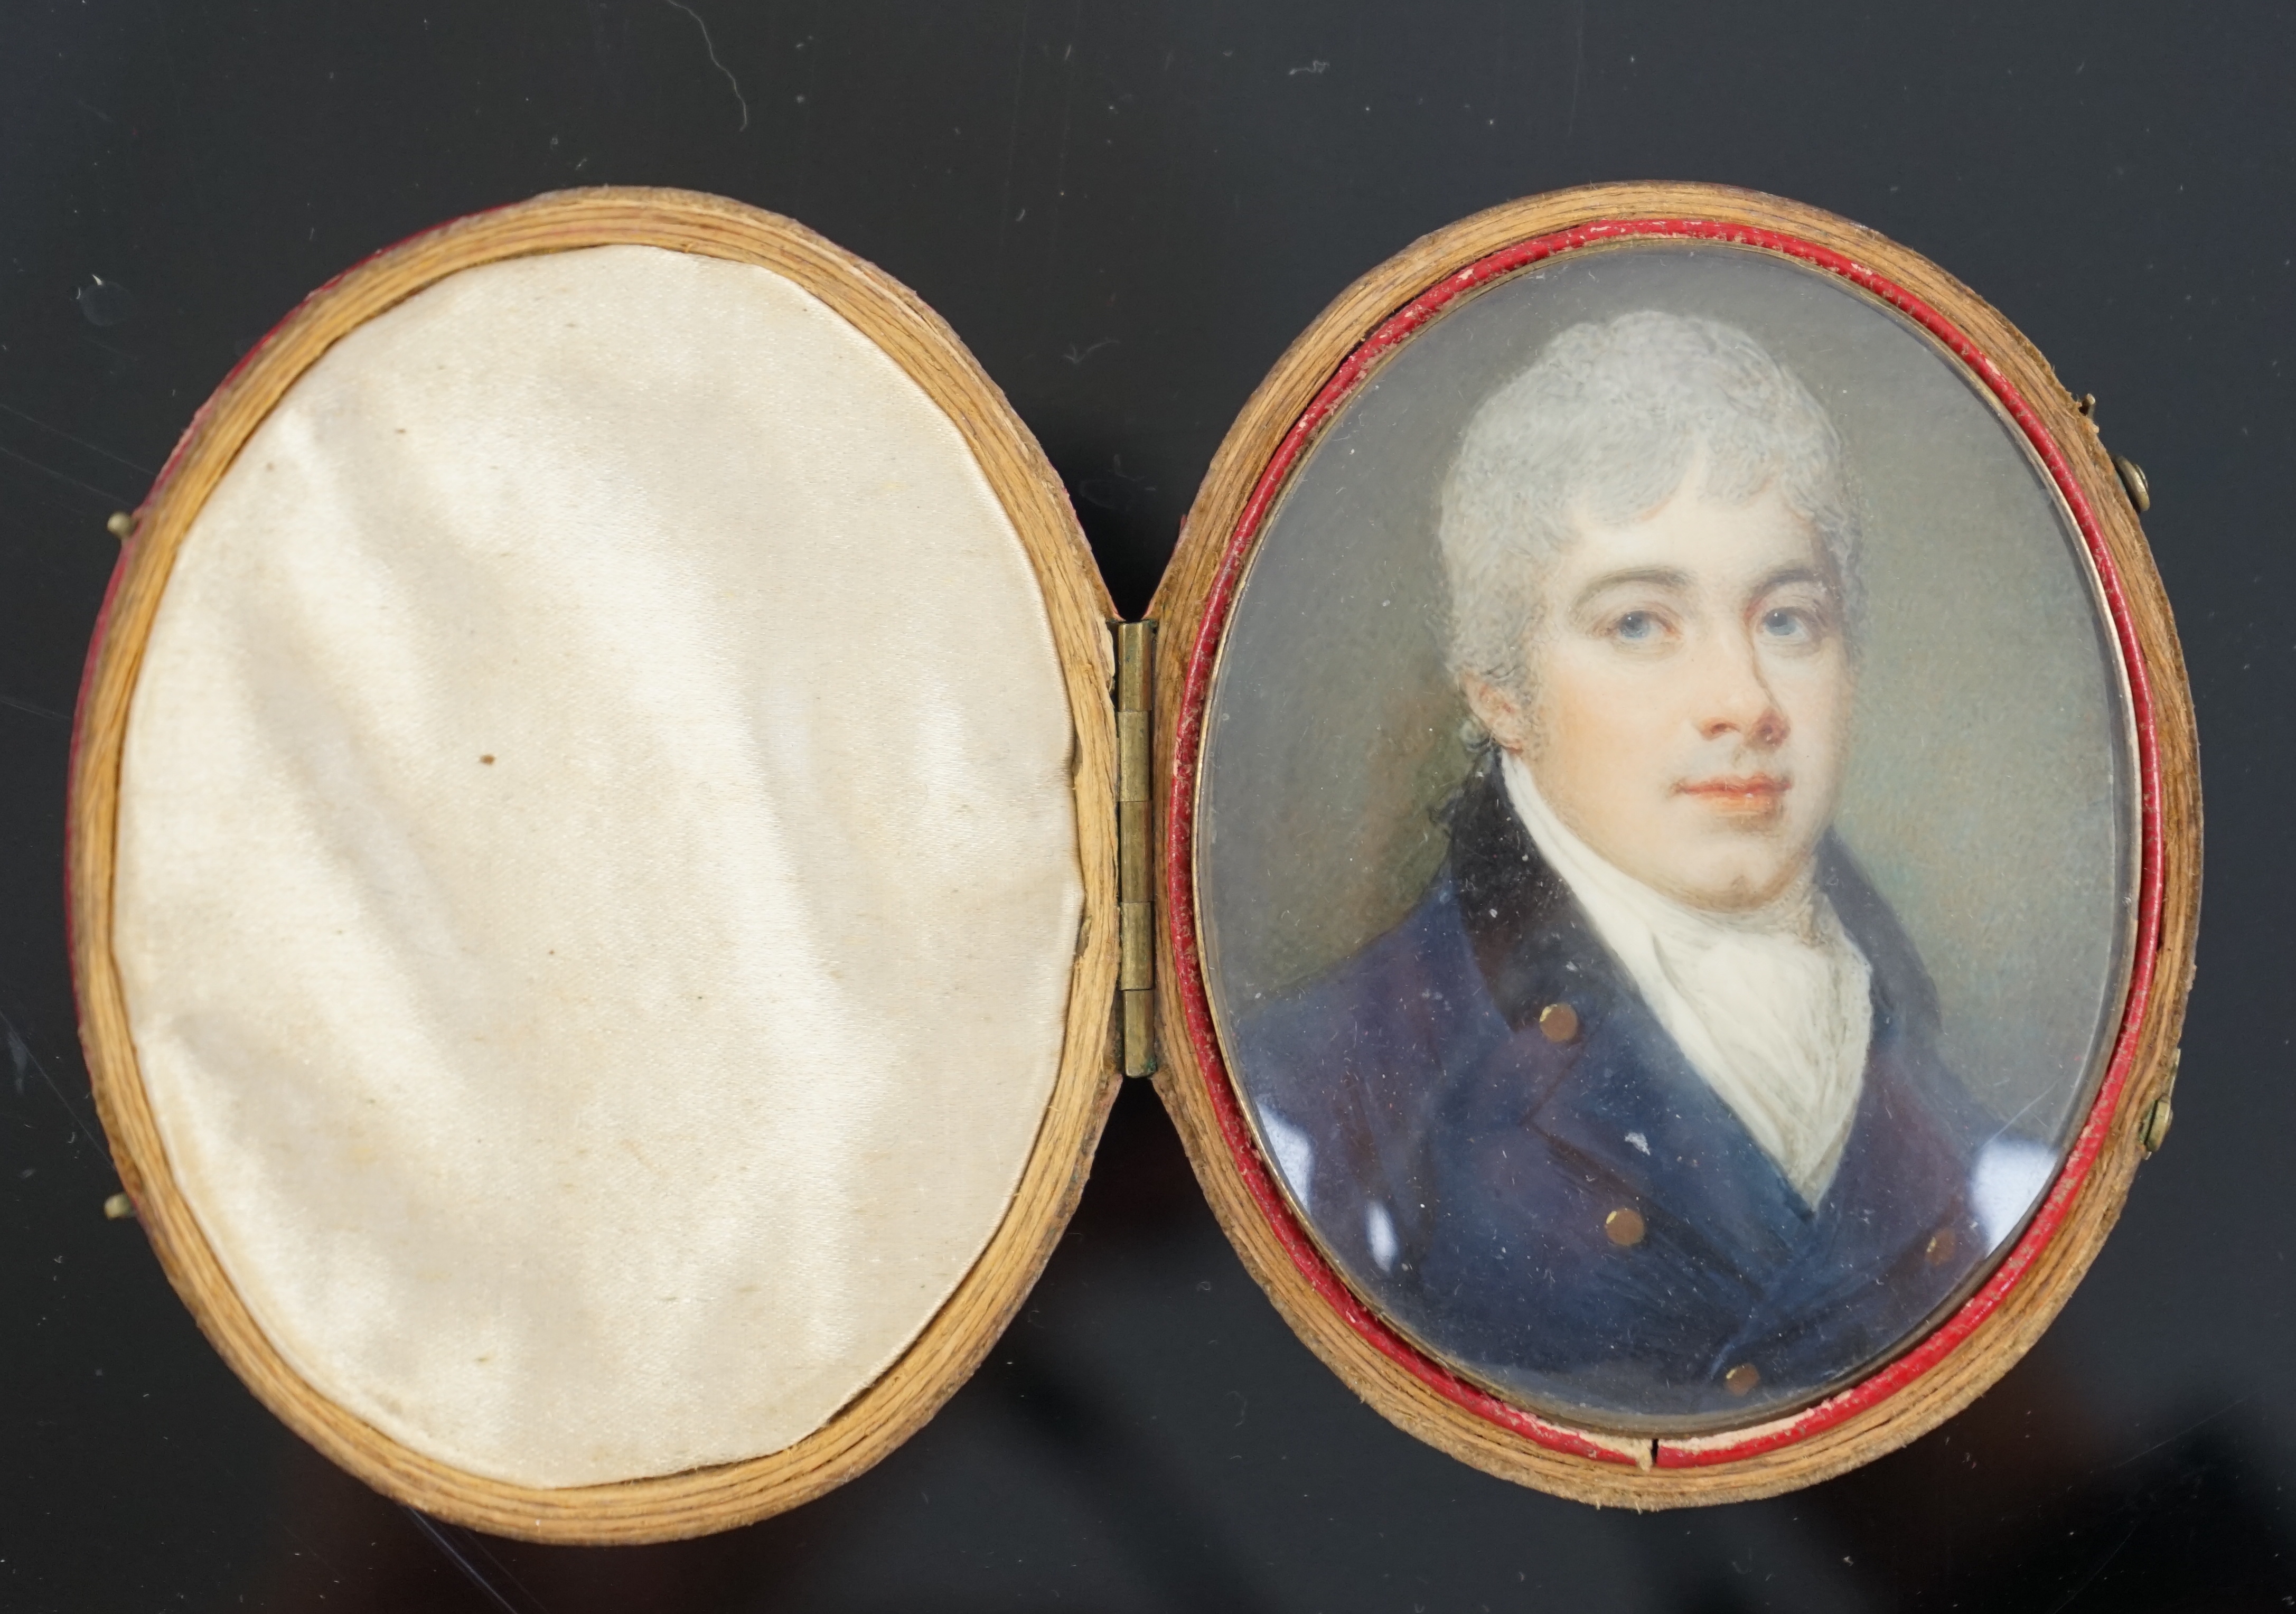 Samuel Shelley (1750-1808), Portrait miniature of a gentleman, watercolour on ivory, 6.6 x 5.3cm. CITES Submission reference N1LU811F